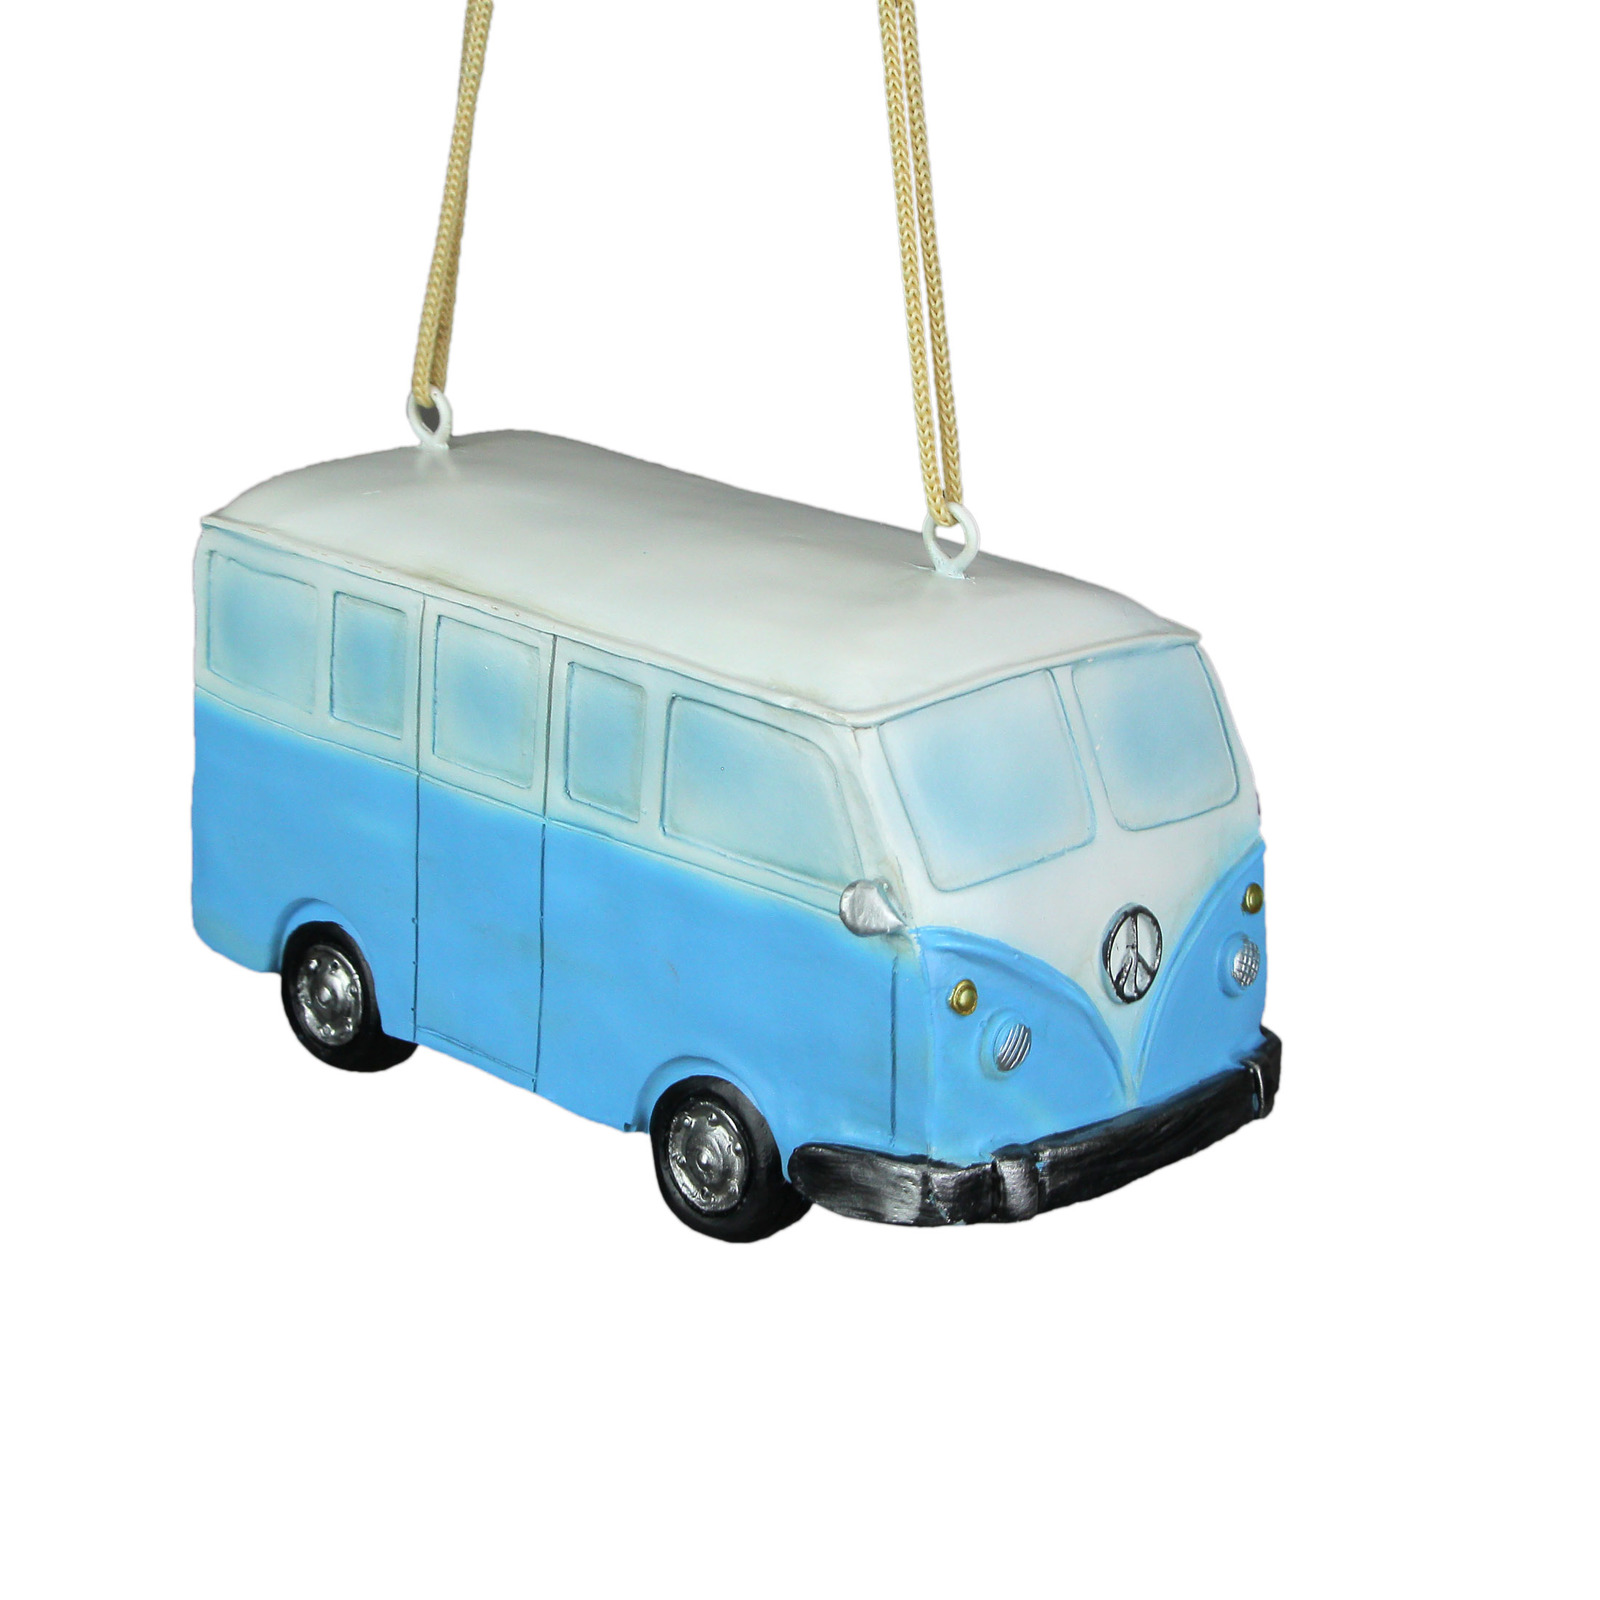 Primary image for Colorful Microbus Hippie Van Shaped Birdhouse For Small Birds